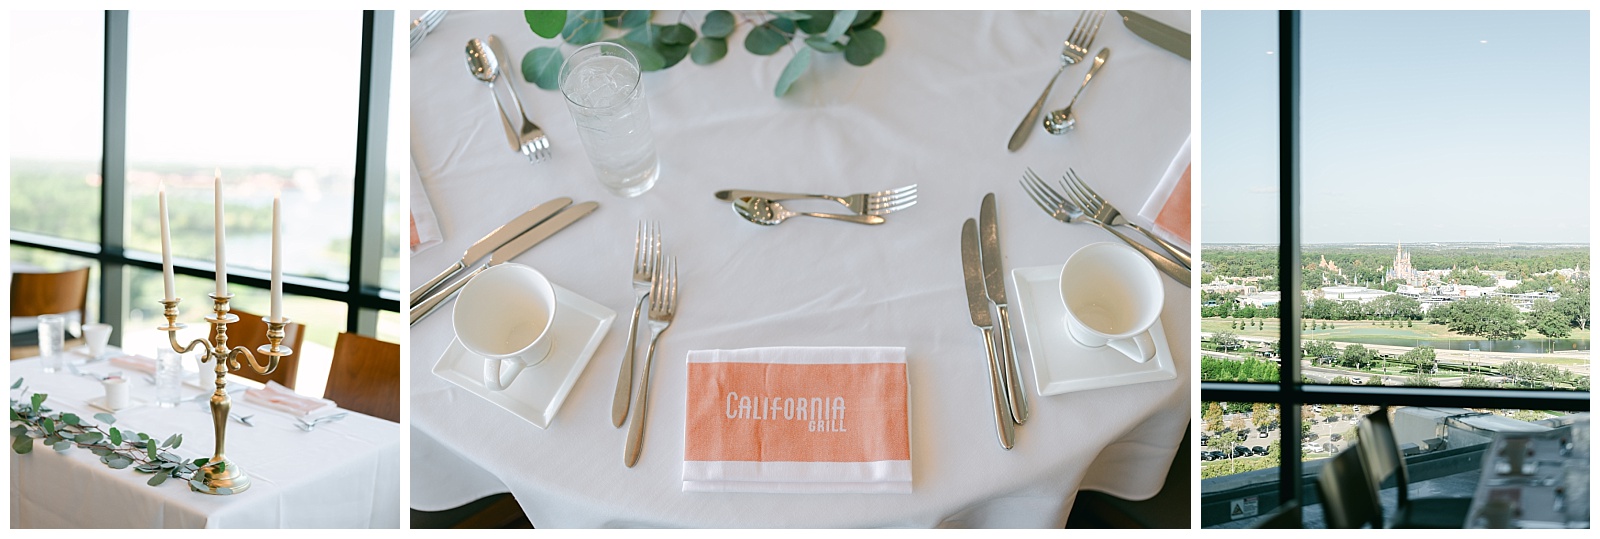 Pre-reception wedding details at the California Grill by Elizabeth Kane Photography in Orlando Florida